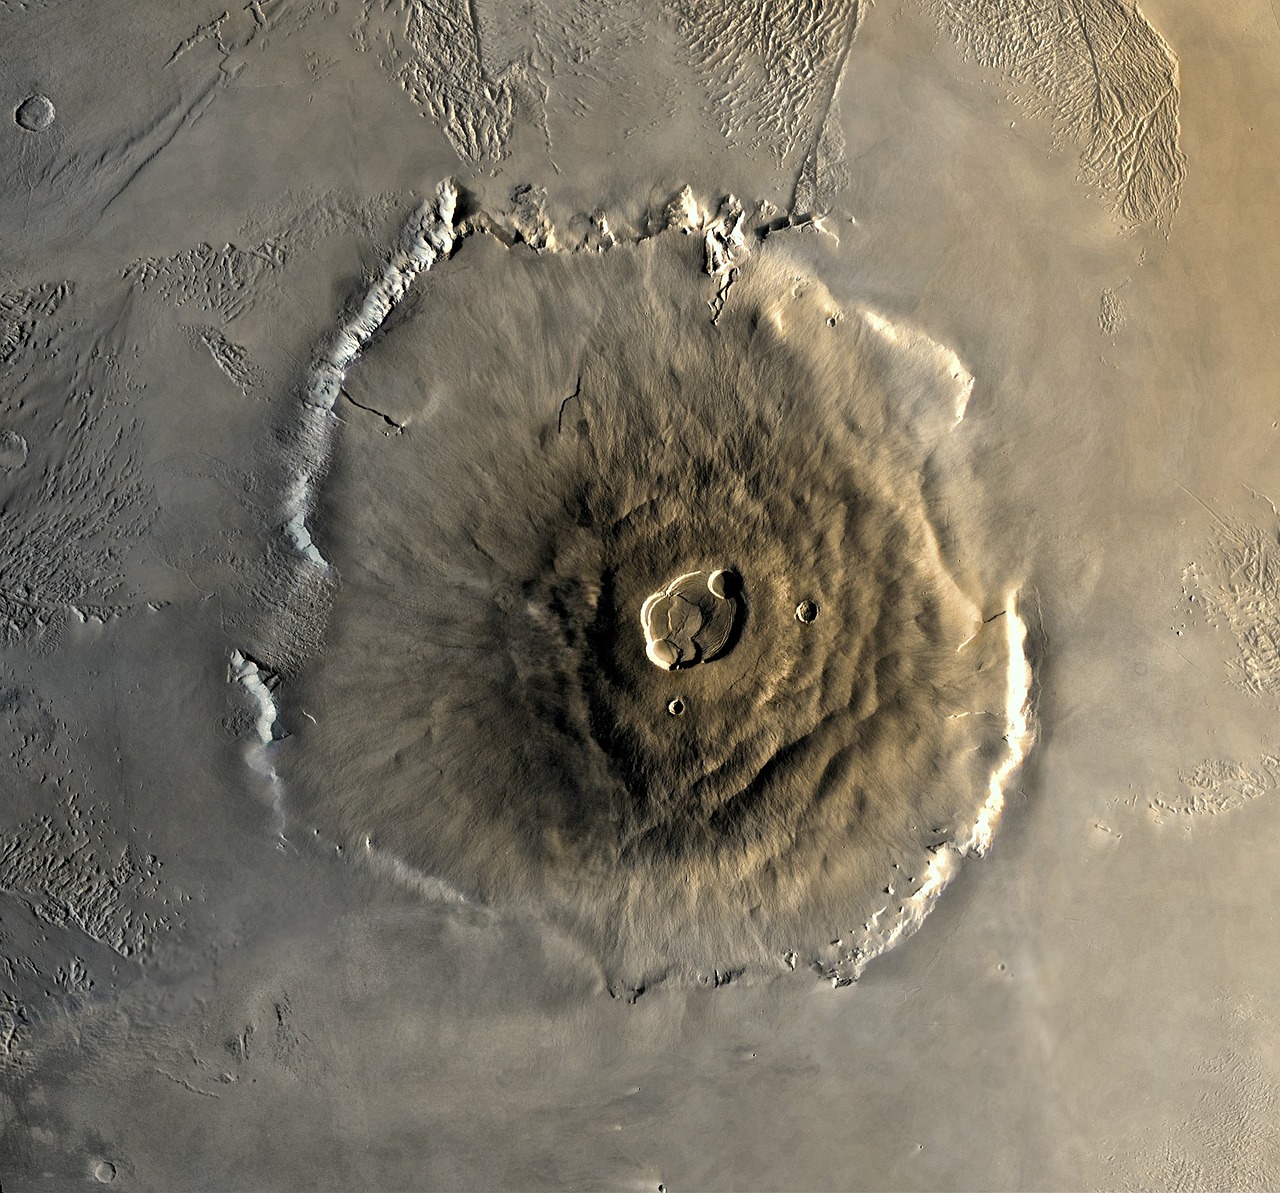 Olympus Mons. https:/www.needpix.com/photo/8174/mars-planet-olympus-mons-volcano-mountain-highest-mountains-space-space-travel; 